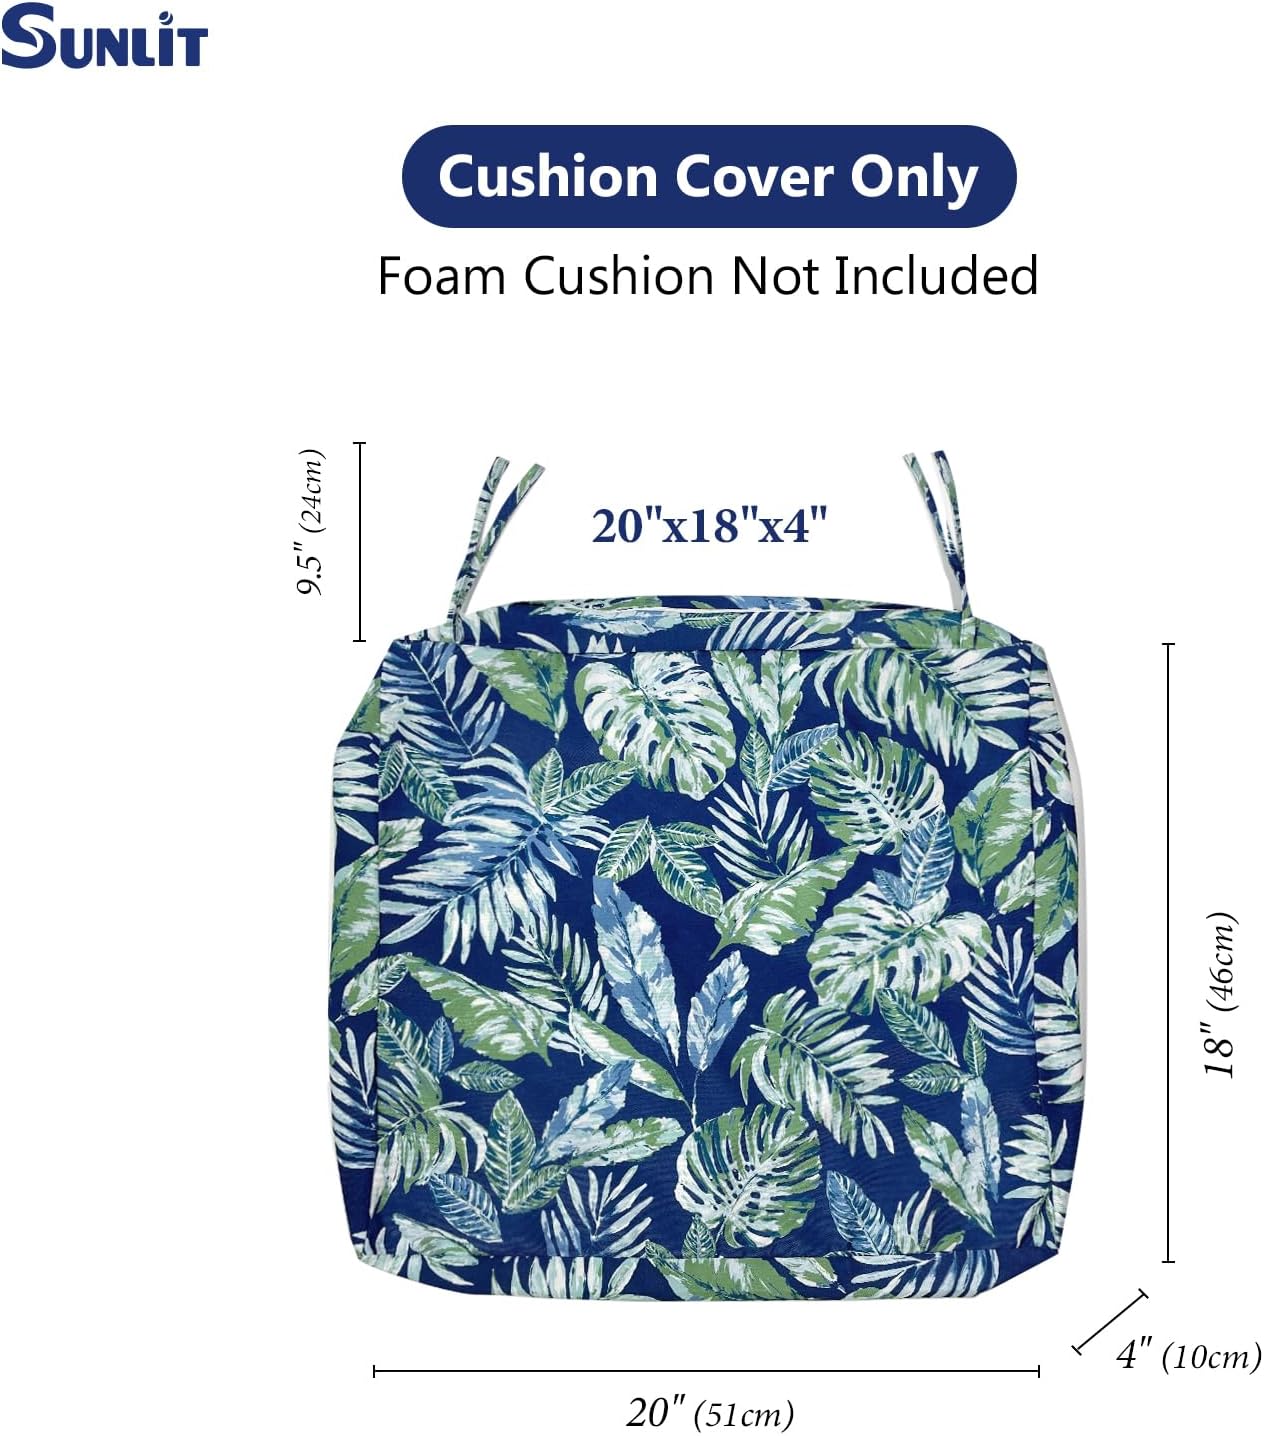 Sunlit Outdoor Cushion Covers 24" x 24" x 4", Replacement Cover Only, 4 Pack Water-Repellent Patio Chair Seat Slipcovers with Zipper and Tie, Tropical Leaf, Blue Green